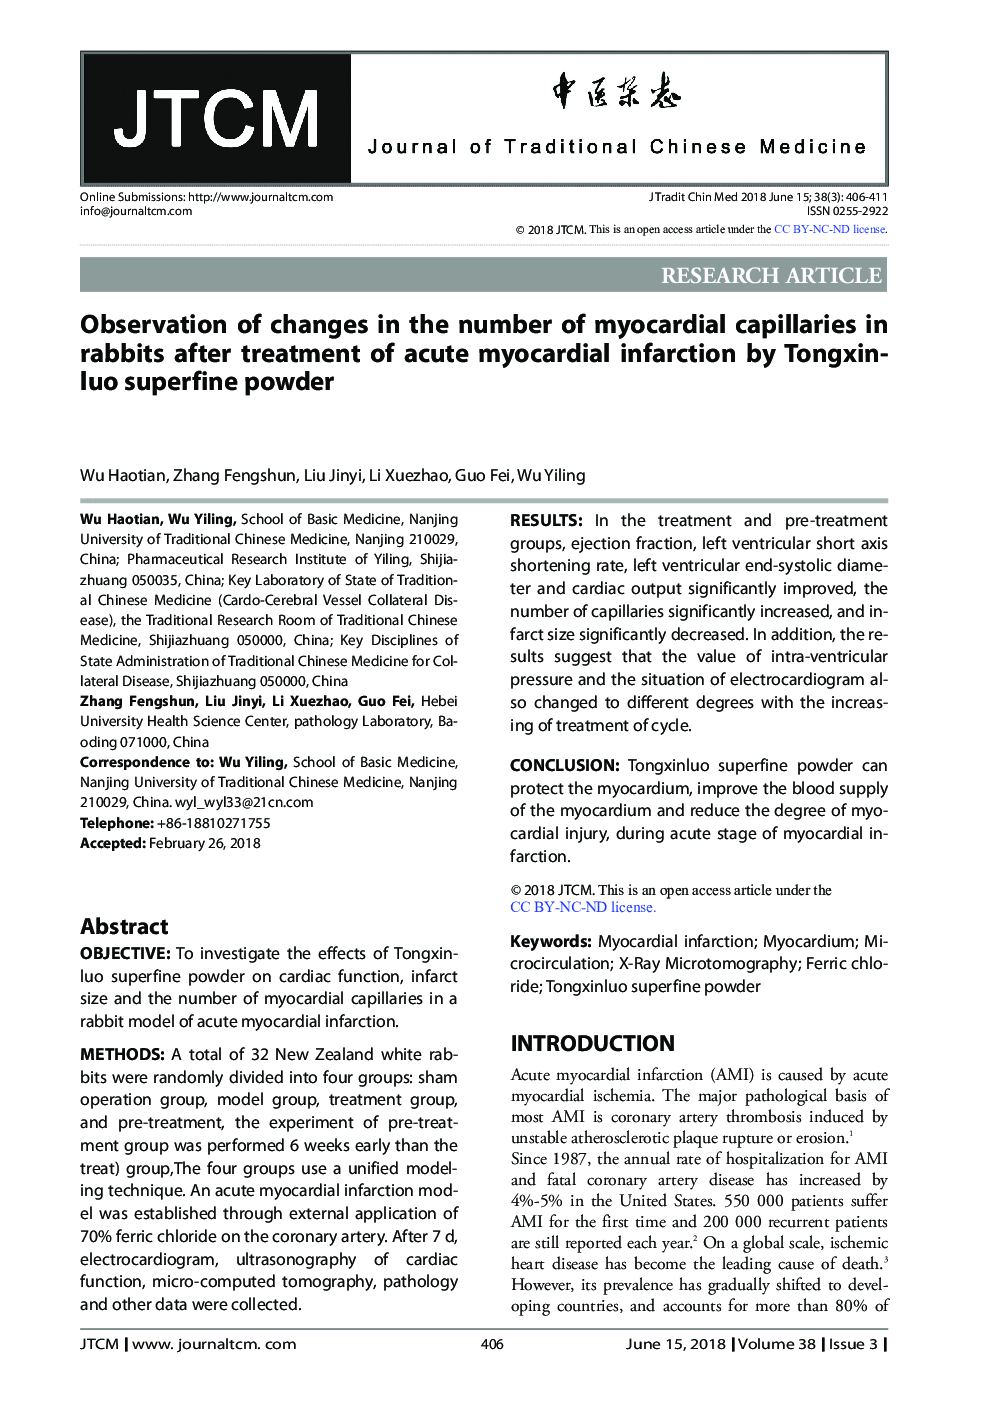 Observation of changes in the number of myocardial capillaries in rabbits after treatment of acute myocardial infarction by Tongxinluo superfine powder